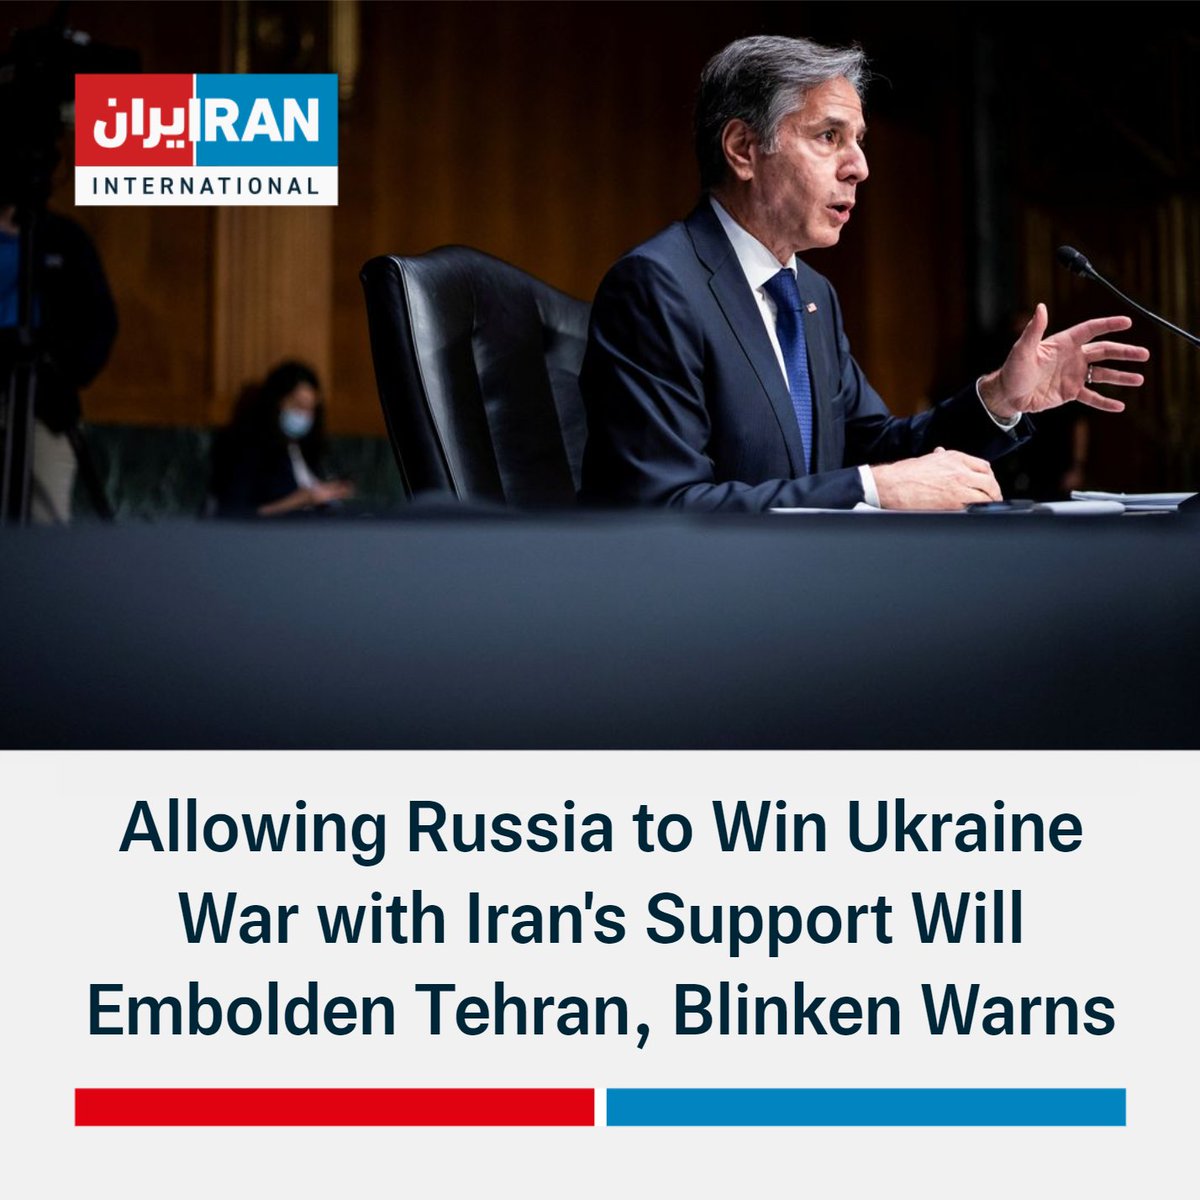 US Secretary of State @SecBlinken at Senate hearing: Since we cut off Russia's traditional means of supplying its military, it has turned more and more to Iran for assistance. In return, Moscow has supplied Iran with increasingly advanced military technology